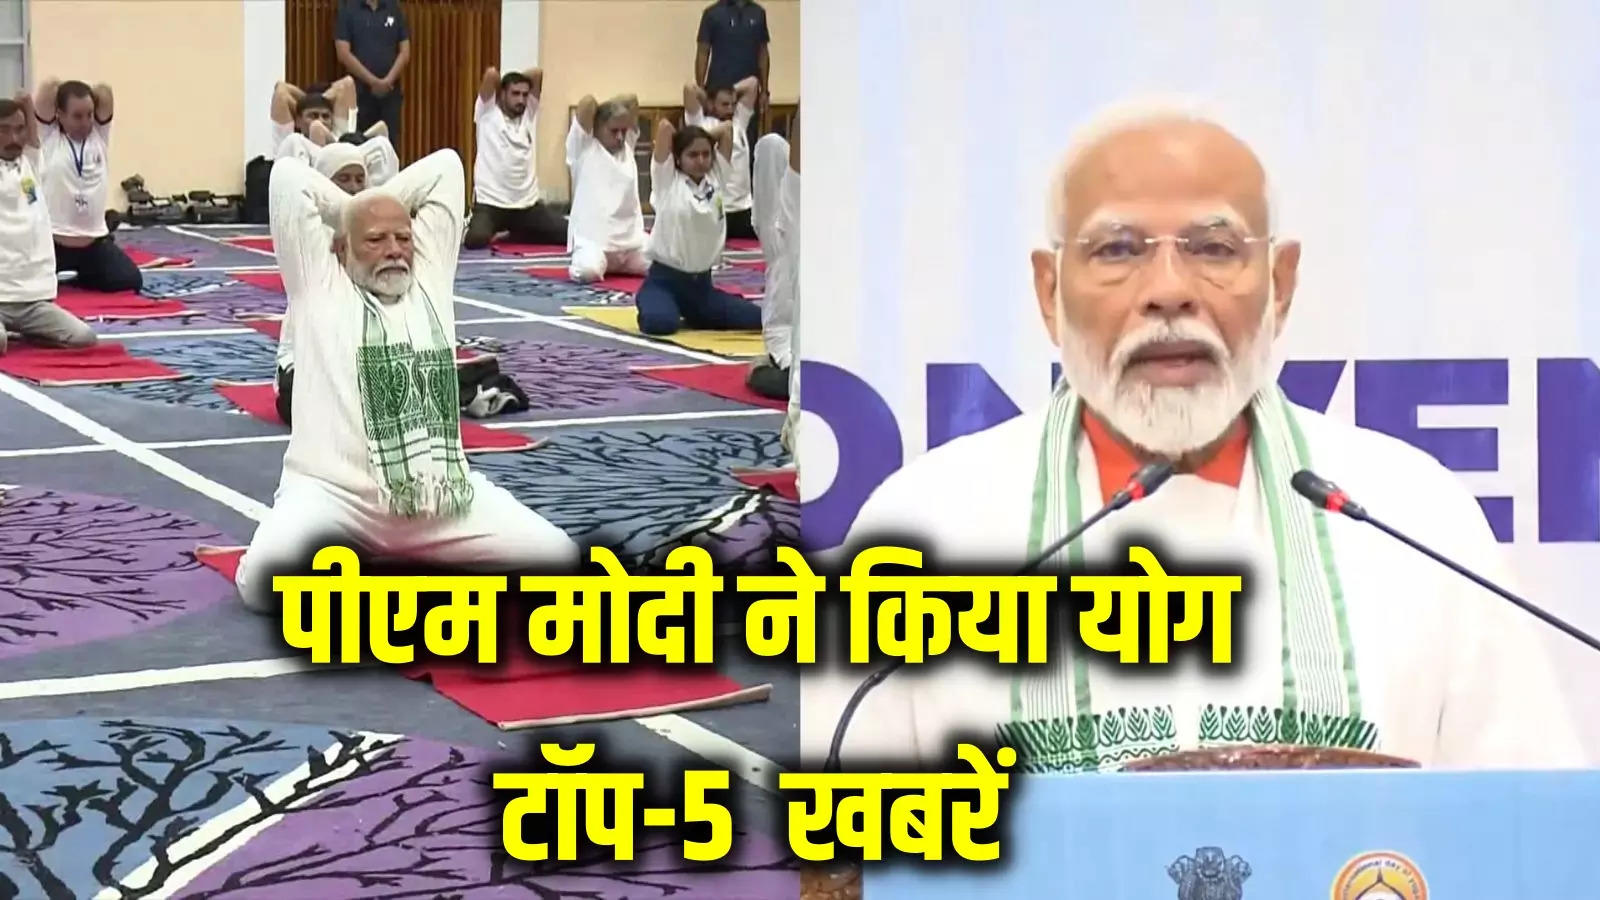 Today's latest news: PM Modi wishes Yoga Day from Srinagar, read the top 5 news of 21 June morning